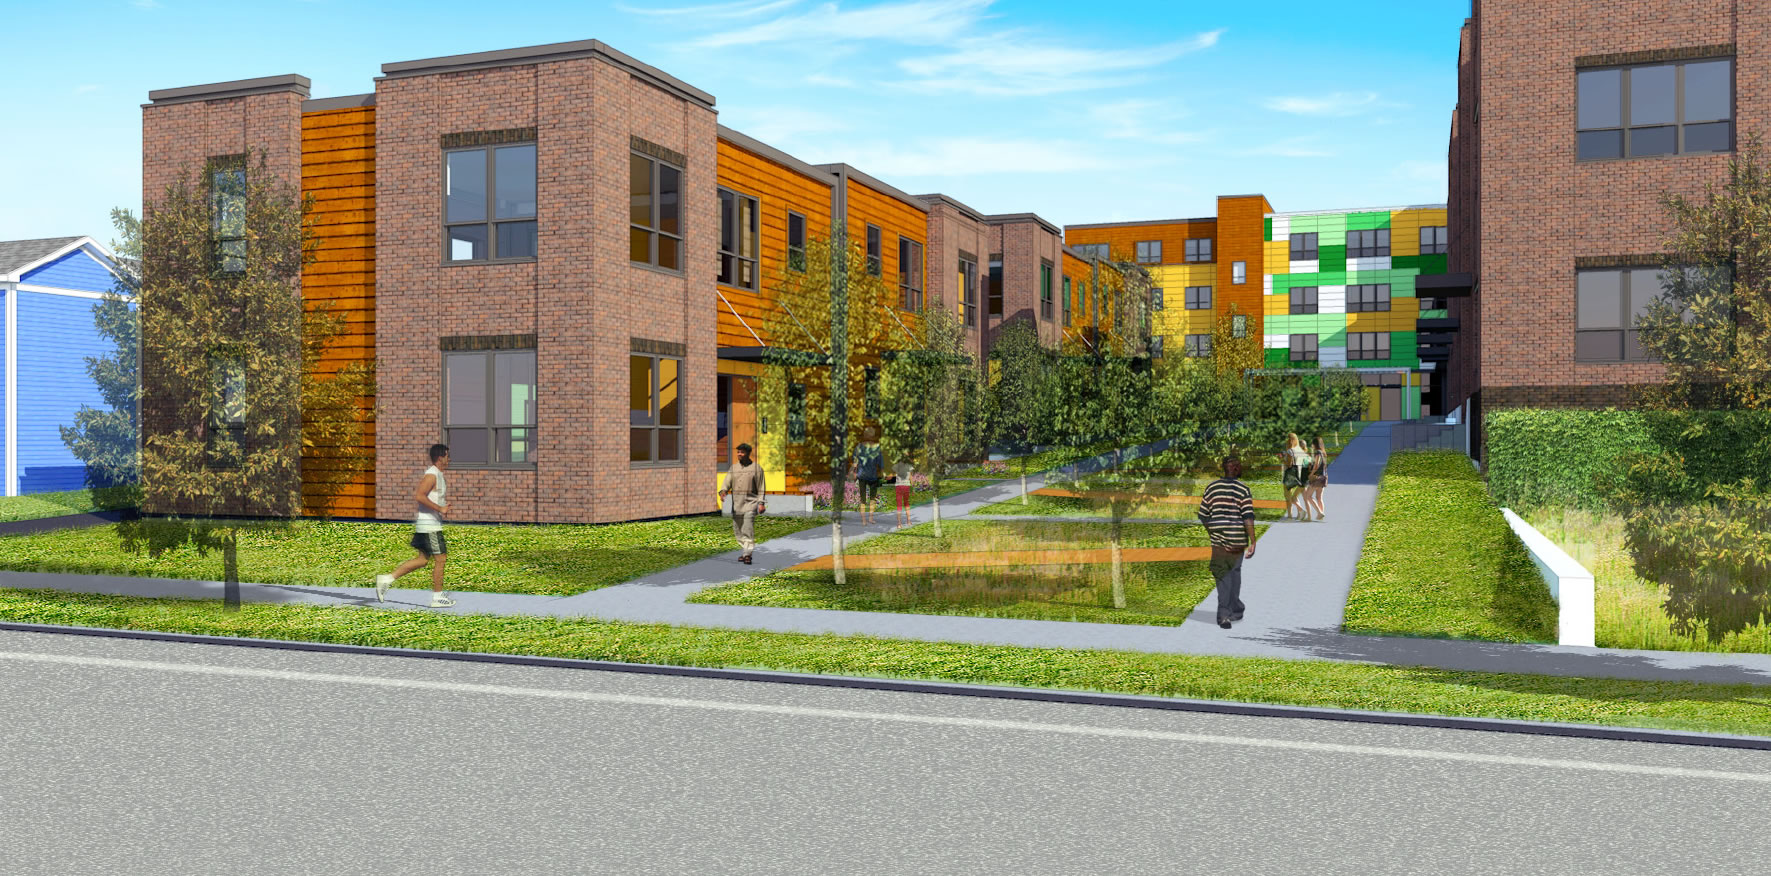 The original rendering of the planned raingarden area at EcoVillage Apartments.